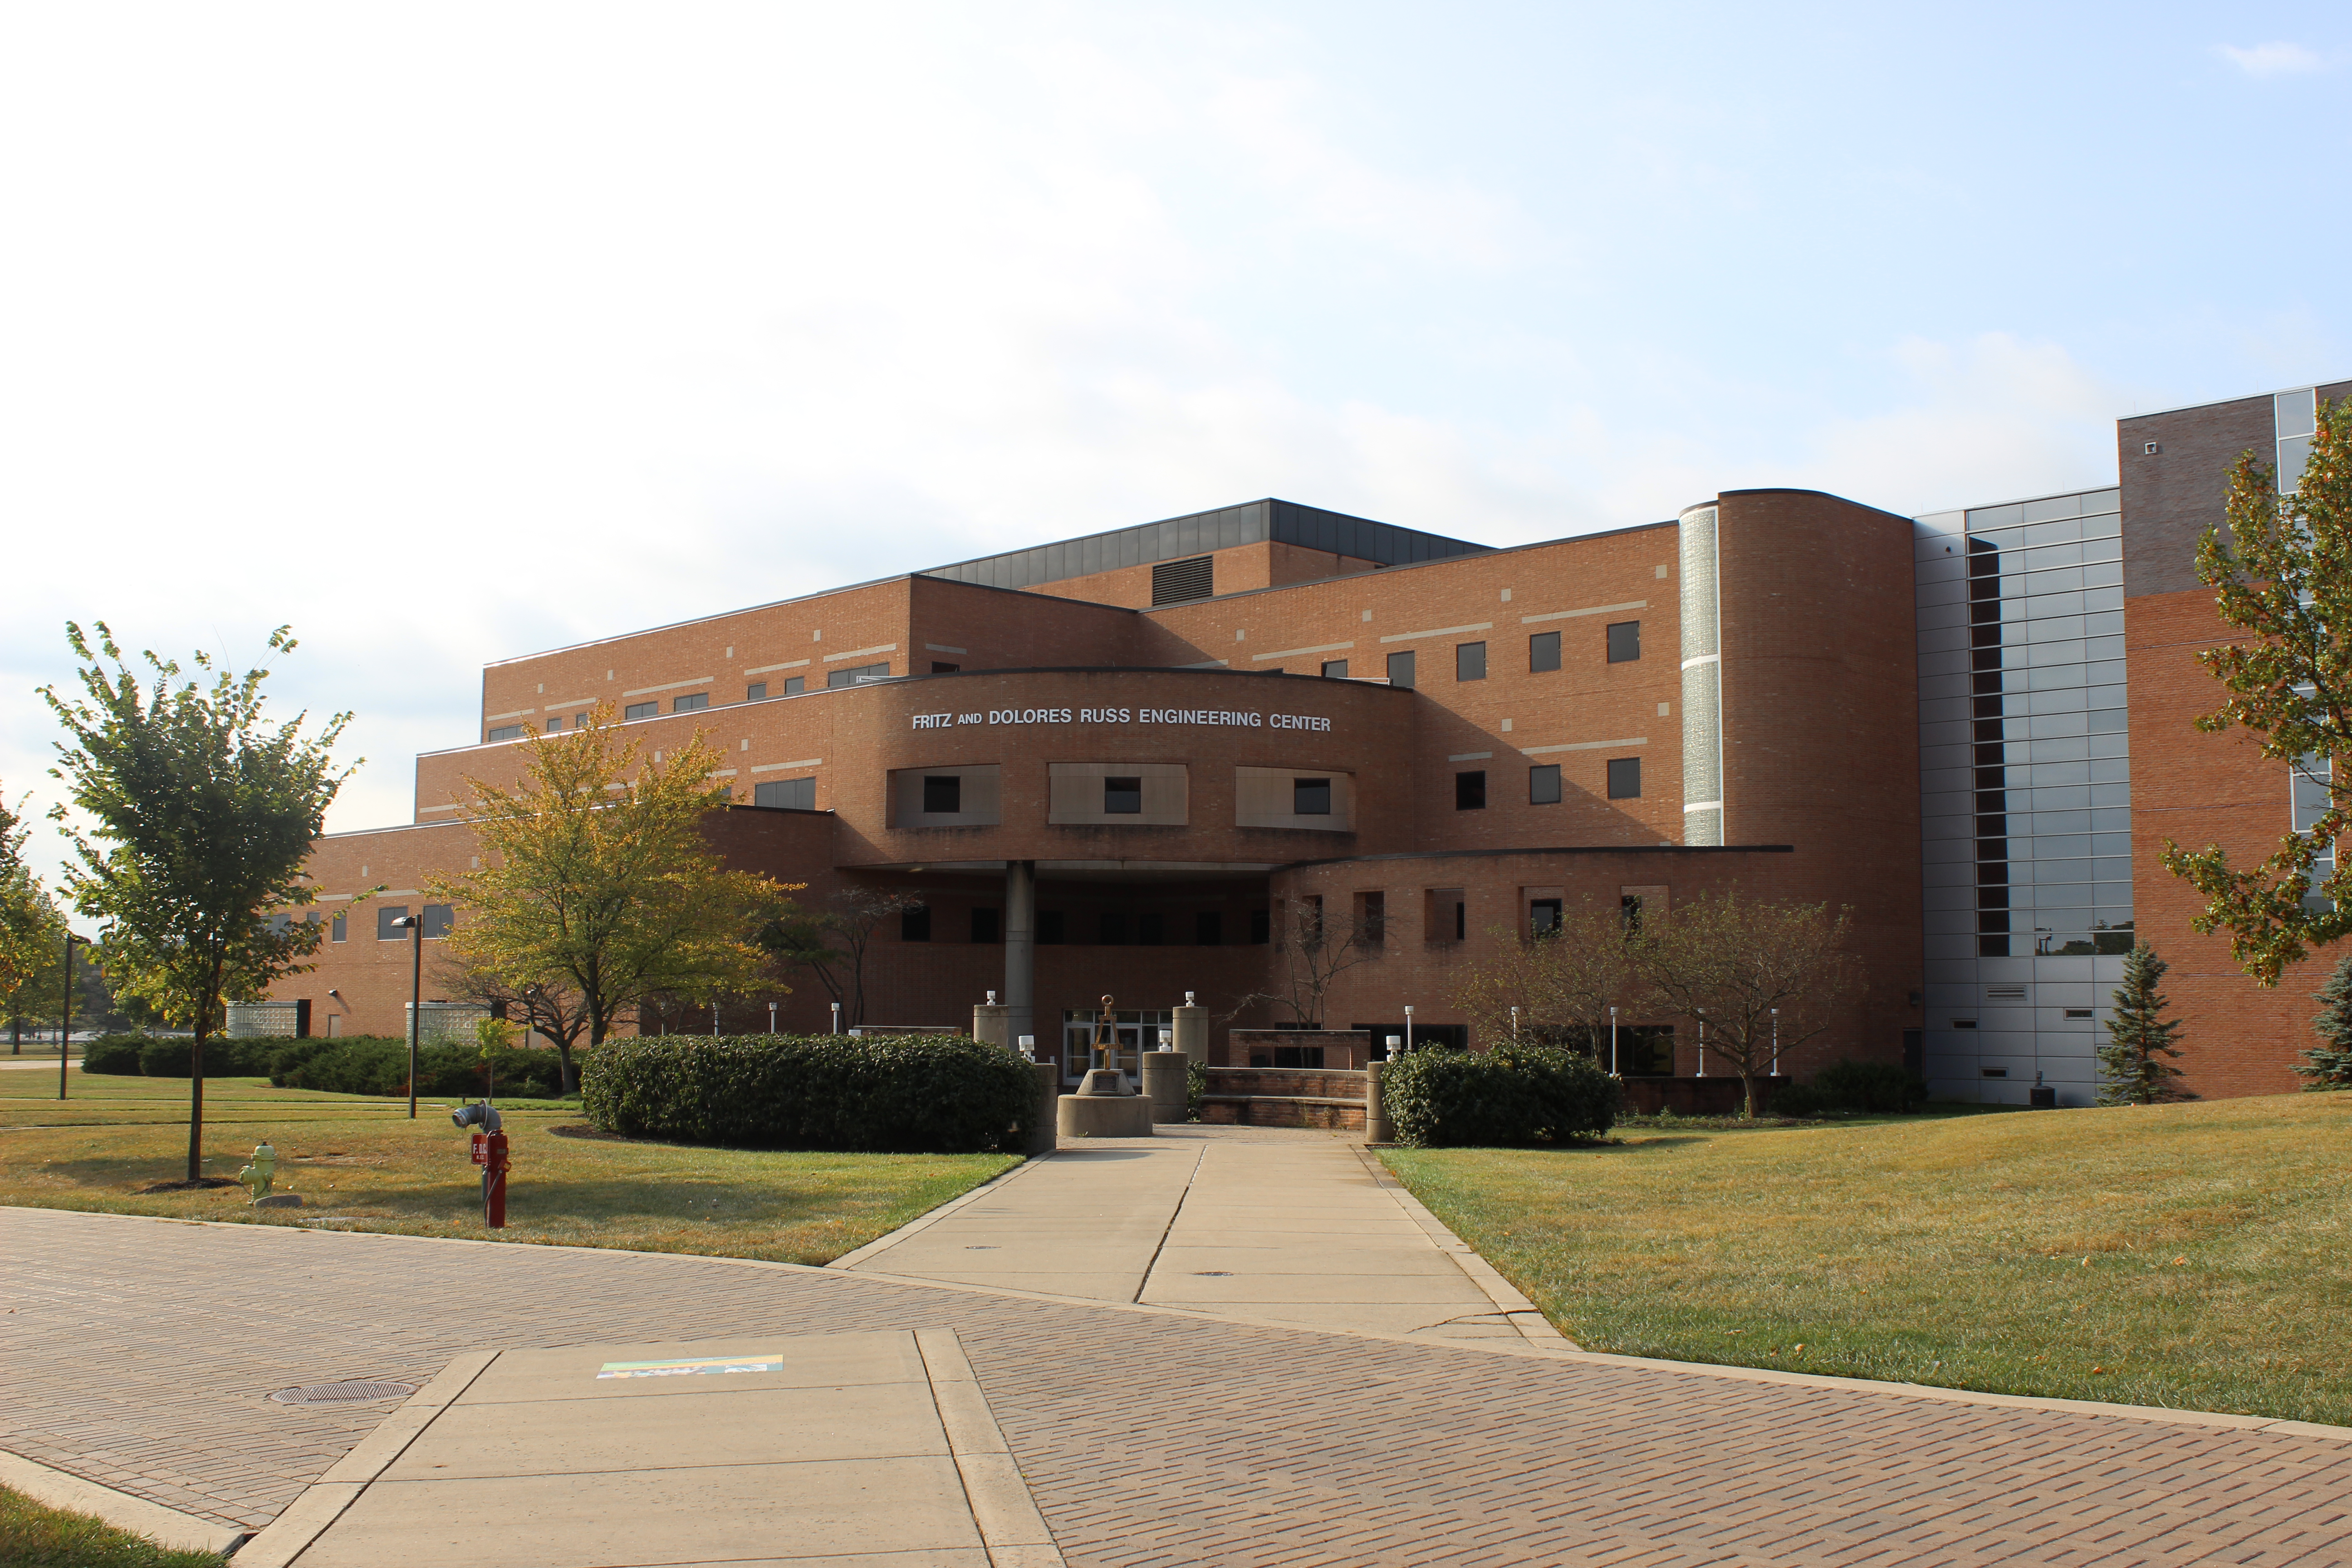 Russ Engineering Center | Photo by Daniel Delgado | The Wright State Guardian